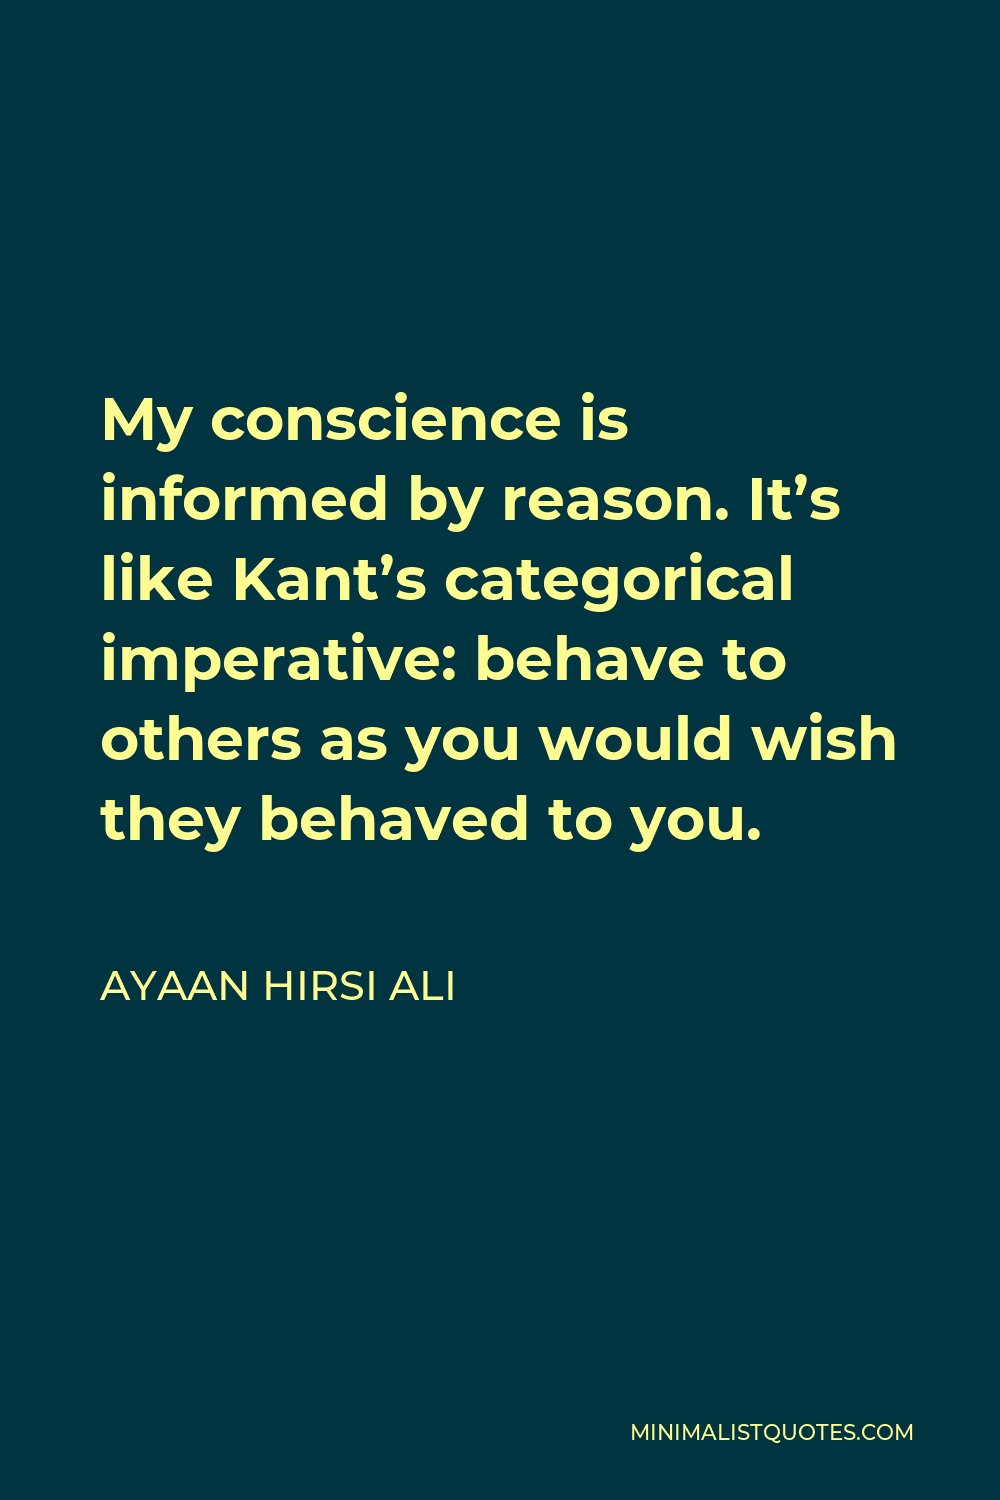 Ayaan Hirsi Ali Quote - My conscience is informed by reason. It’s like Kant’s categorical imperative: behave to others as you would wish they behaved to you.